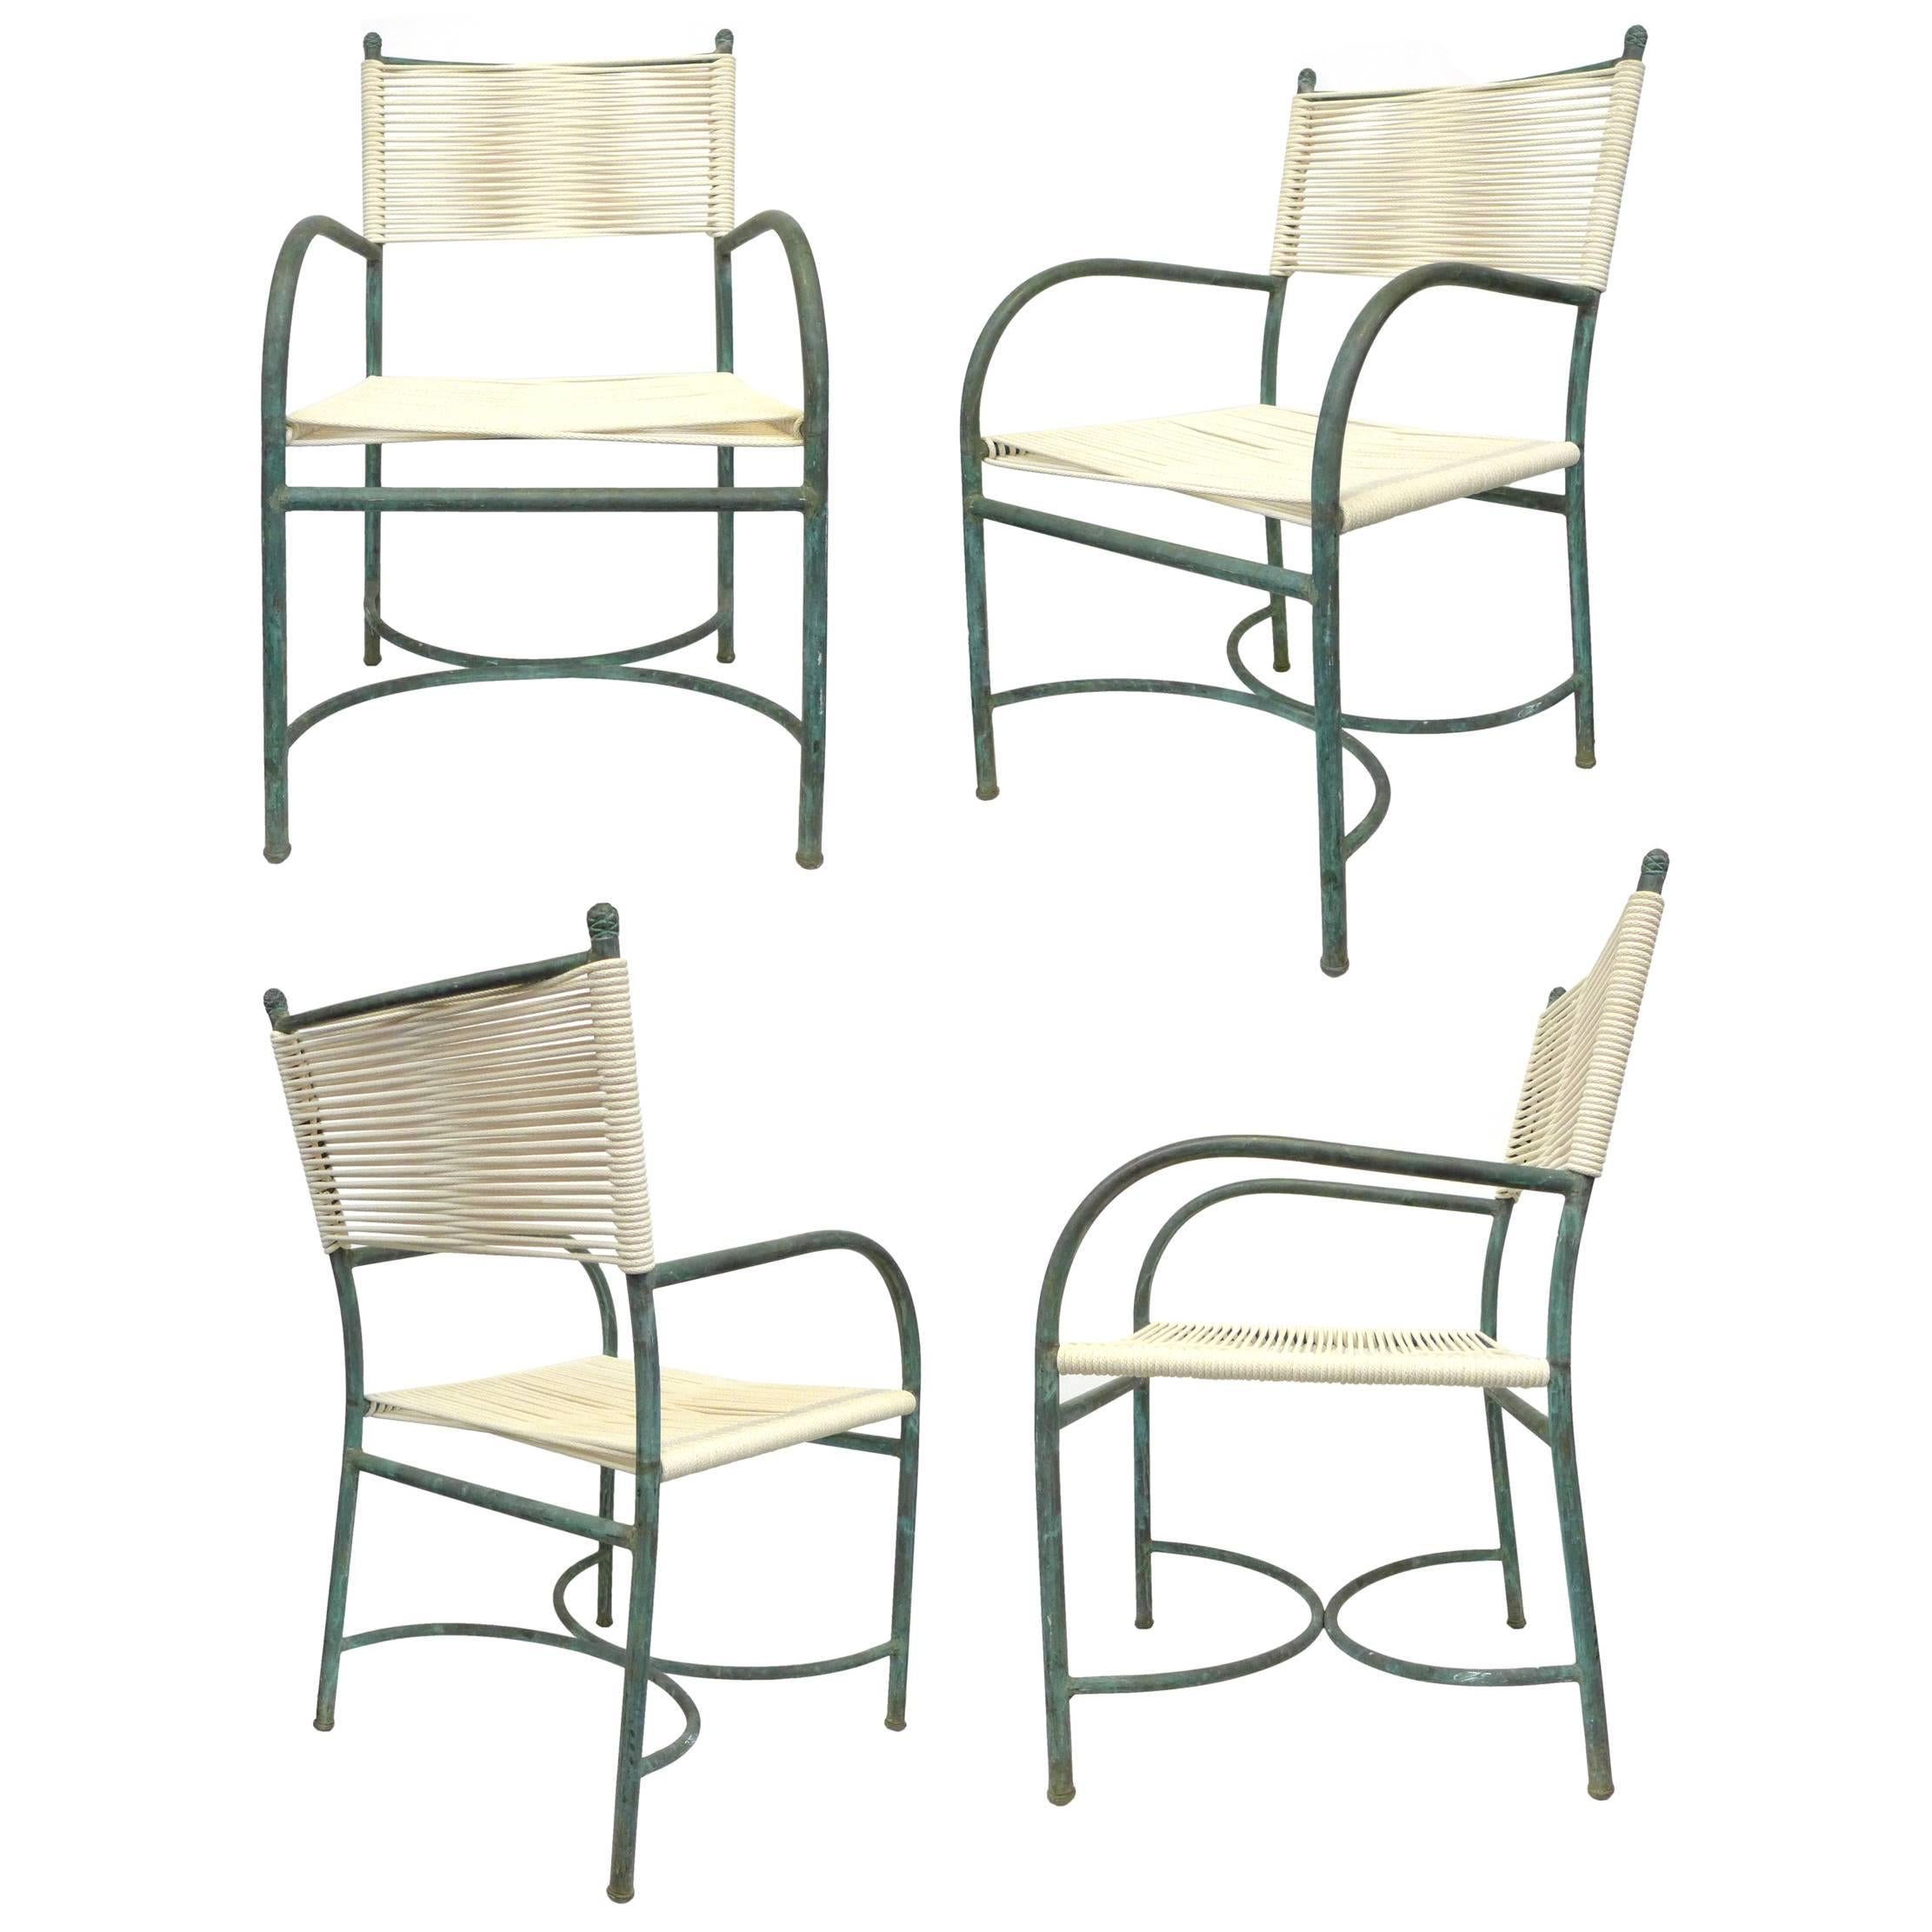 Set of Four Bronze Patinated Outdoor Chairs by Robert Lewis